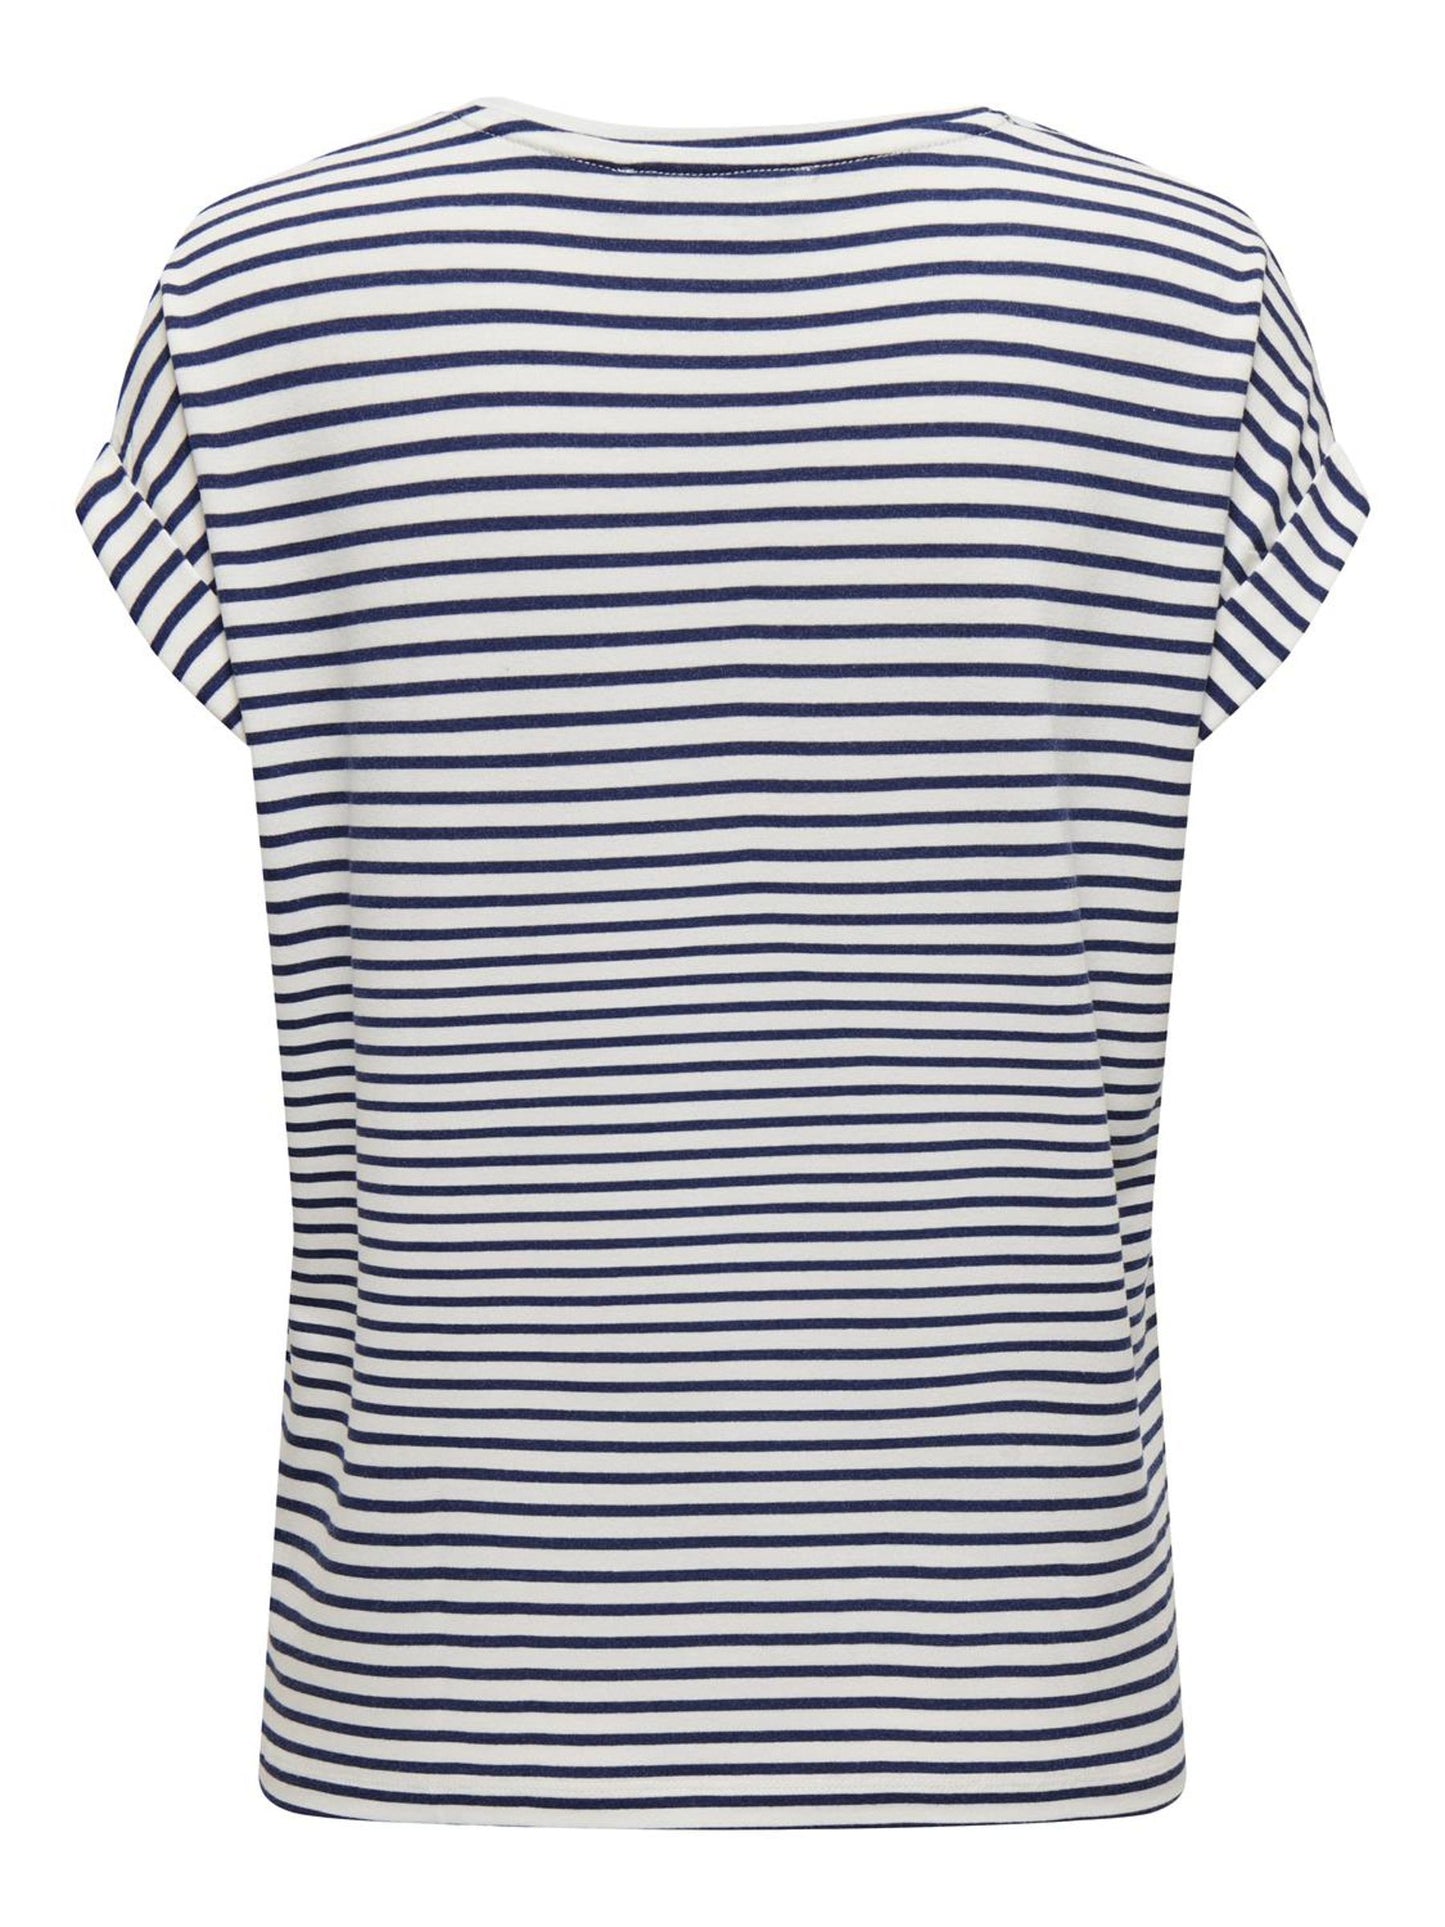 Moster Striped Tee - Naval Academy